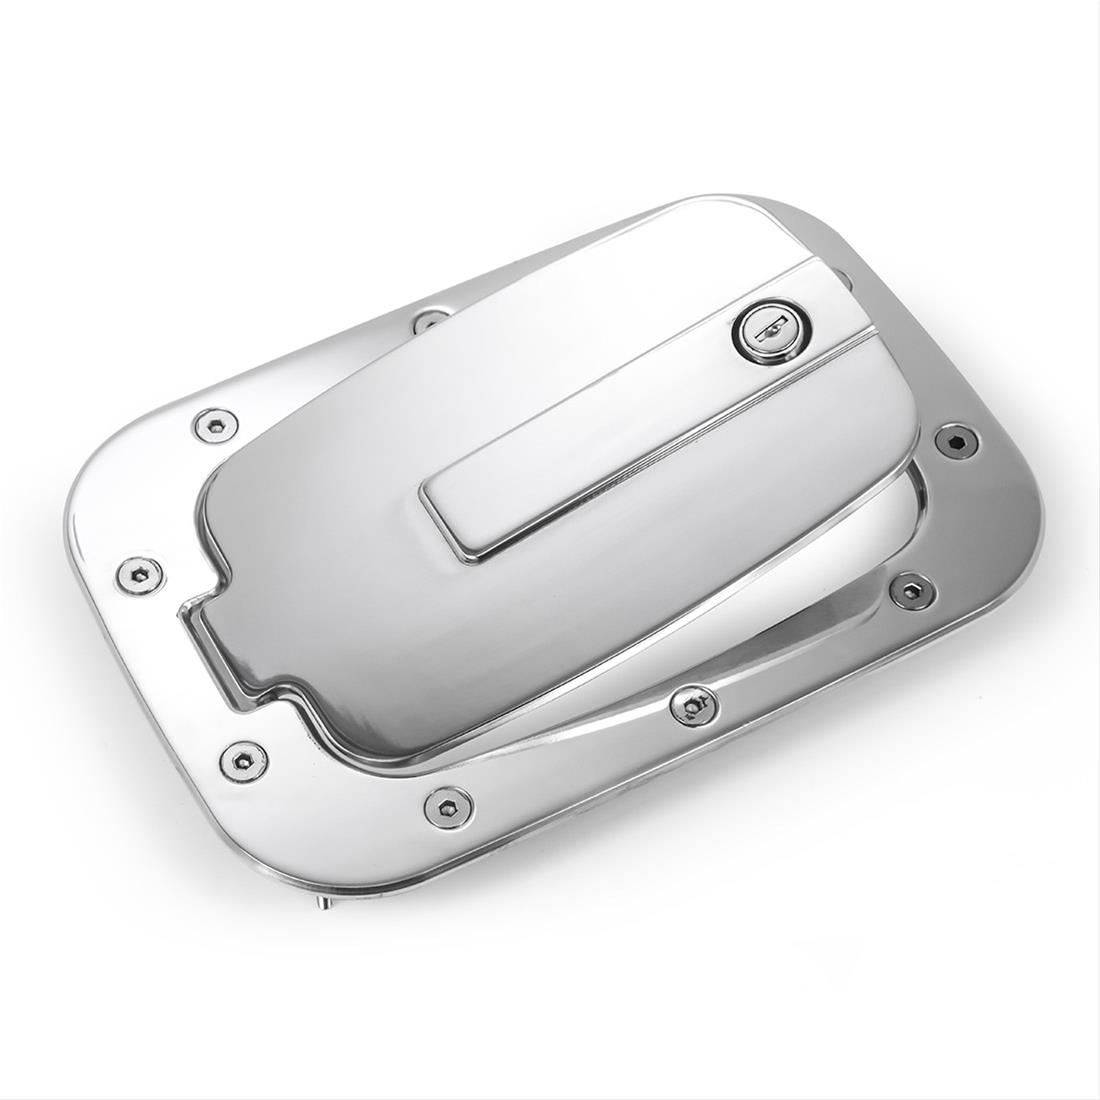 AMI 6158CL Race Style Billet Fuel Dr 10 3/8 X 7 Ring 8 X 4 5/8 Door-Chrome Locking 